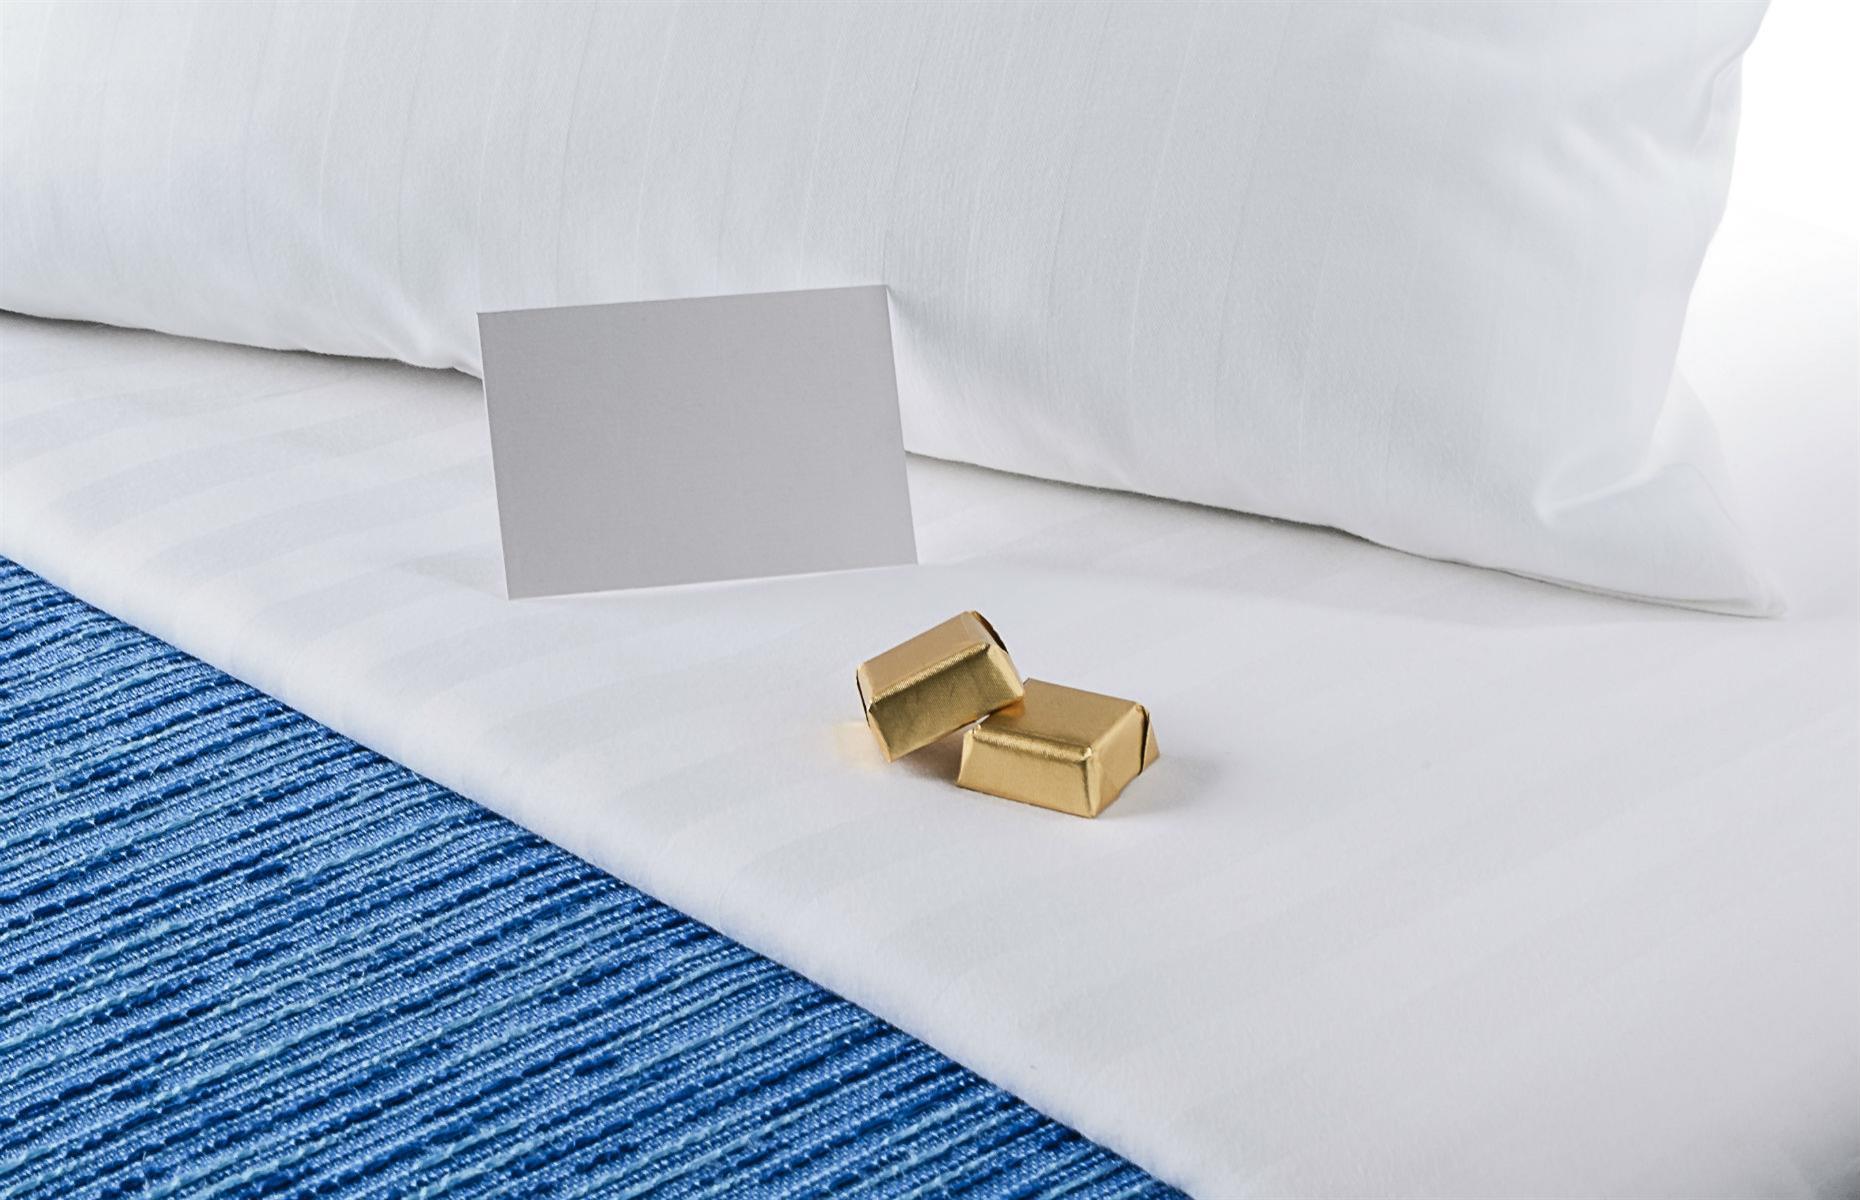 <p>This is pretty much the only thing on your bed that you are allowed to consume or take home. The same applies to the complimentary cookies by the tea and coffee making facilities, if there are any.</p>